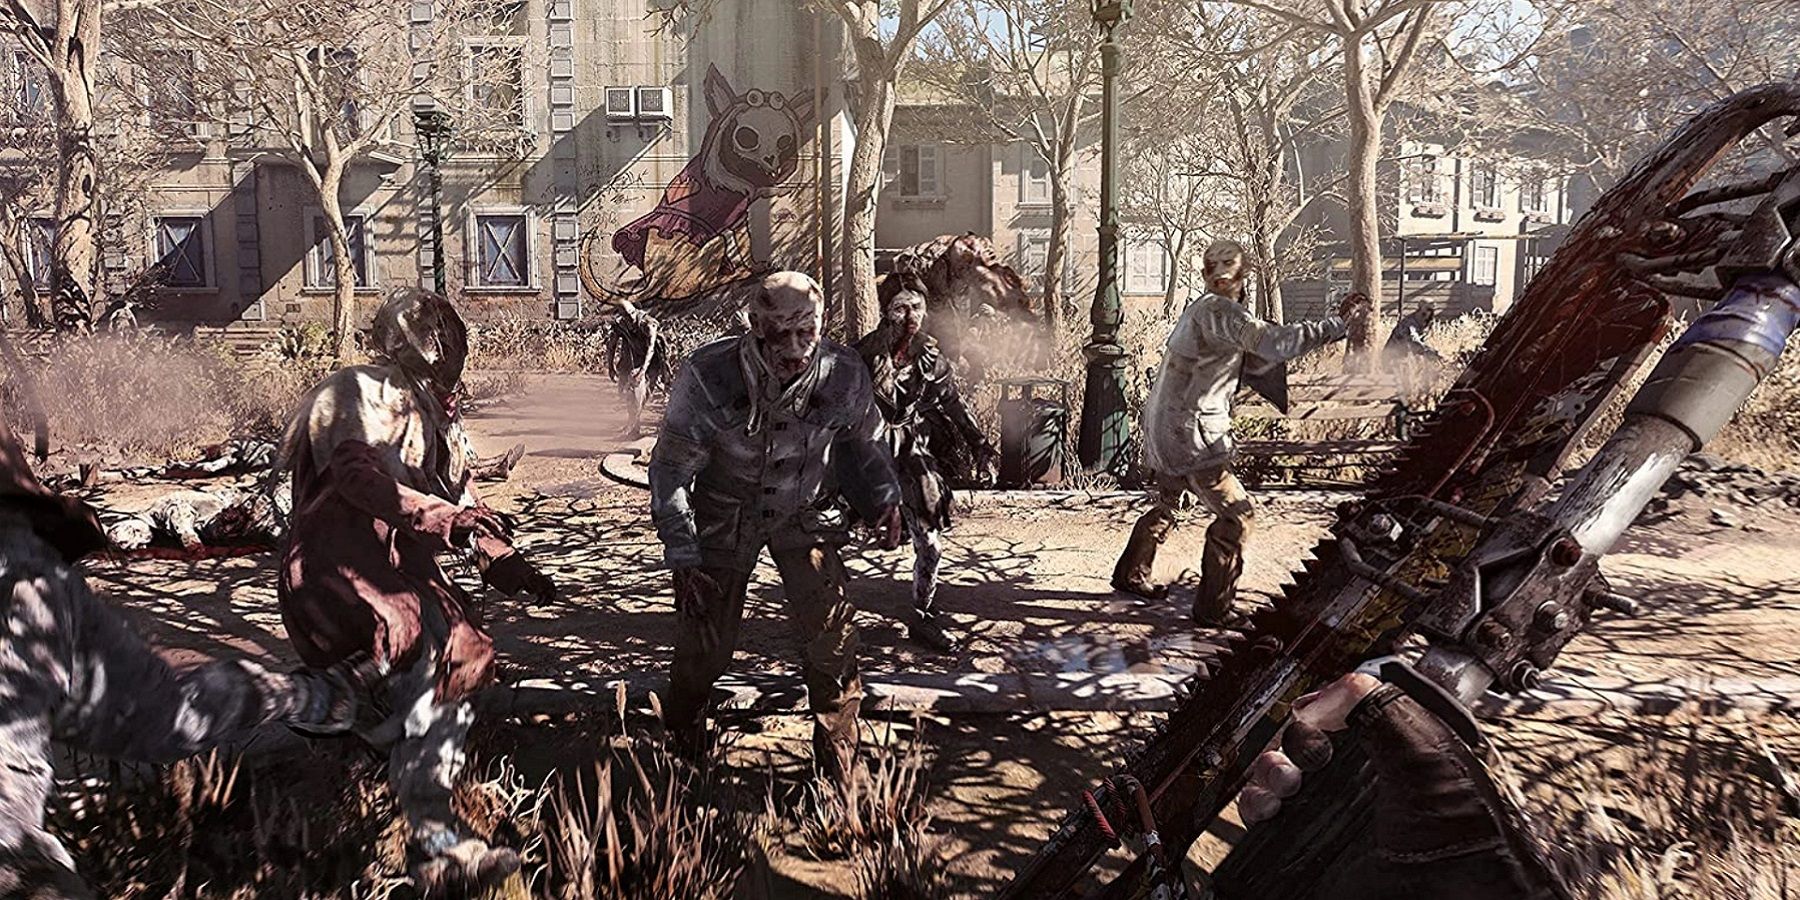 Image from Dying Light 2 showing zombies advancing on the player.